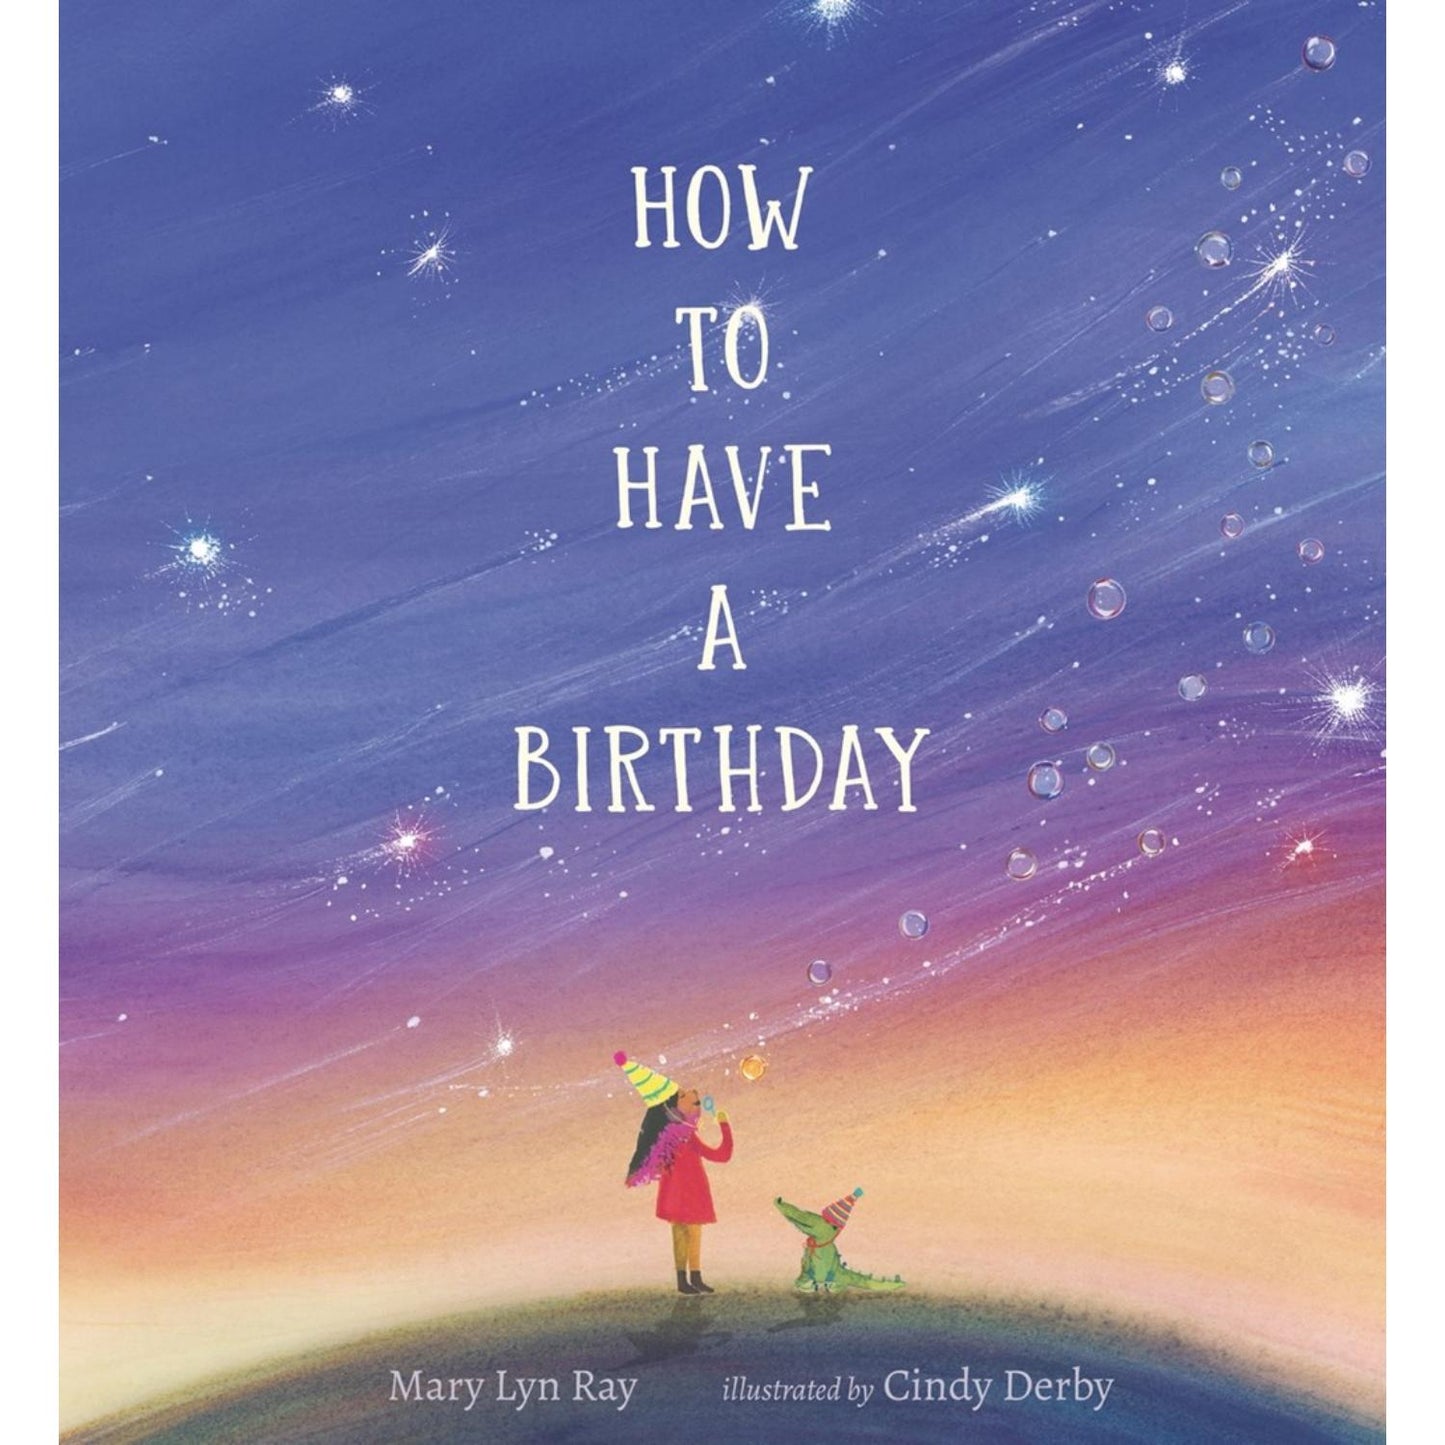 How to Have a Birthday | Hardcover | Children's Book on Feelings & Emotions